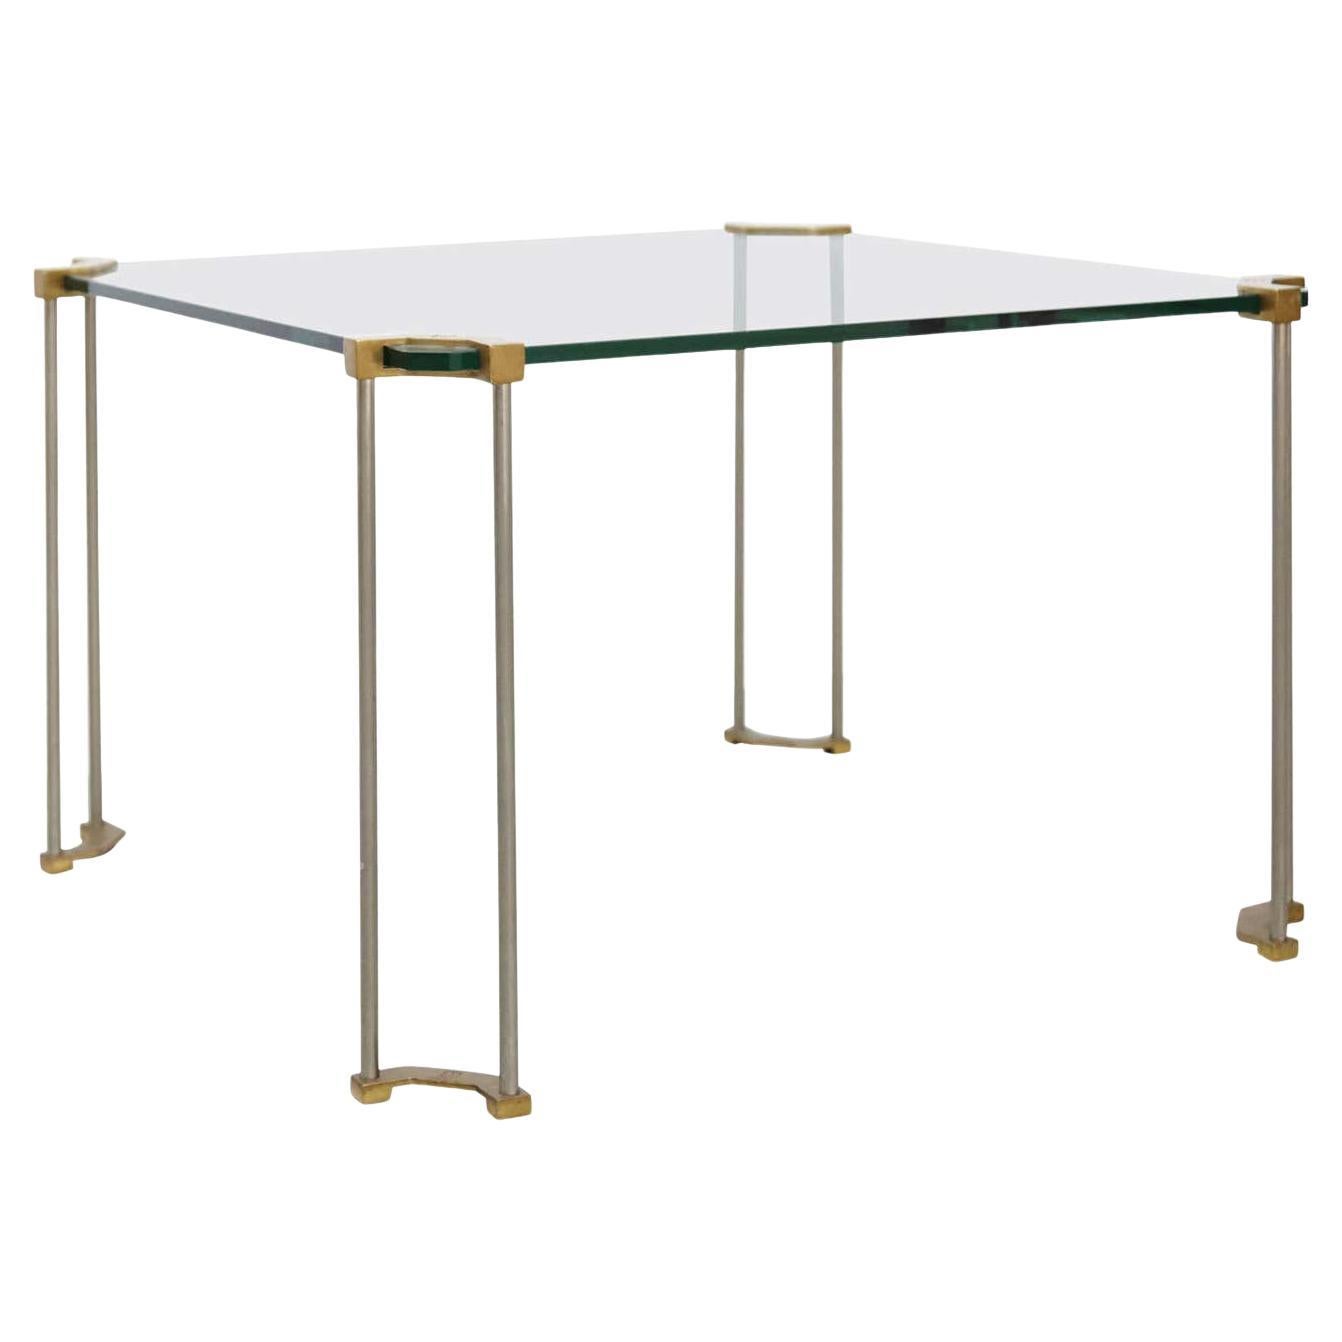 Peter Ghyczy Glass Low Table, circa 1970